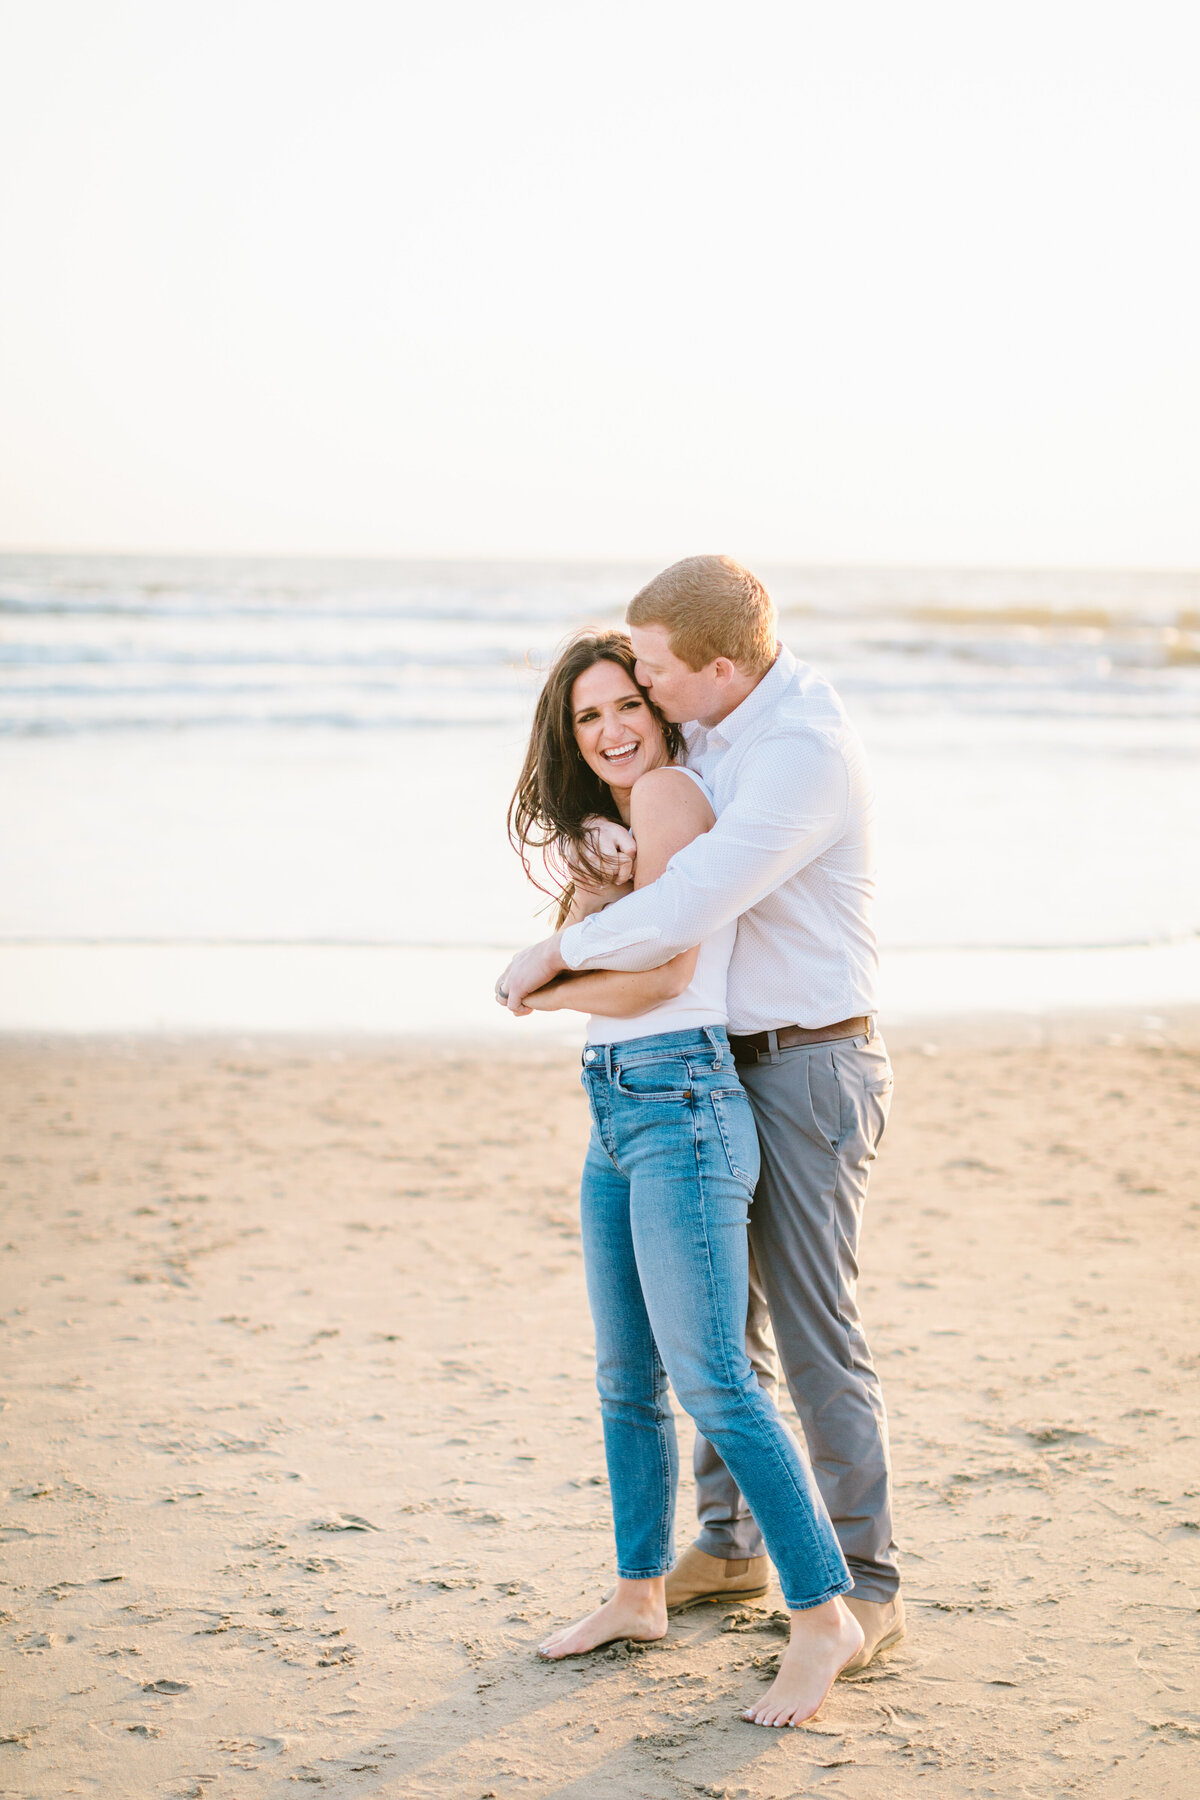 Best California and Texas Engagement Photographer-Jodee Debes Photography-97